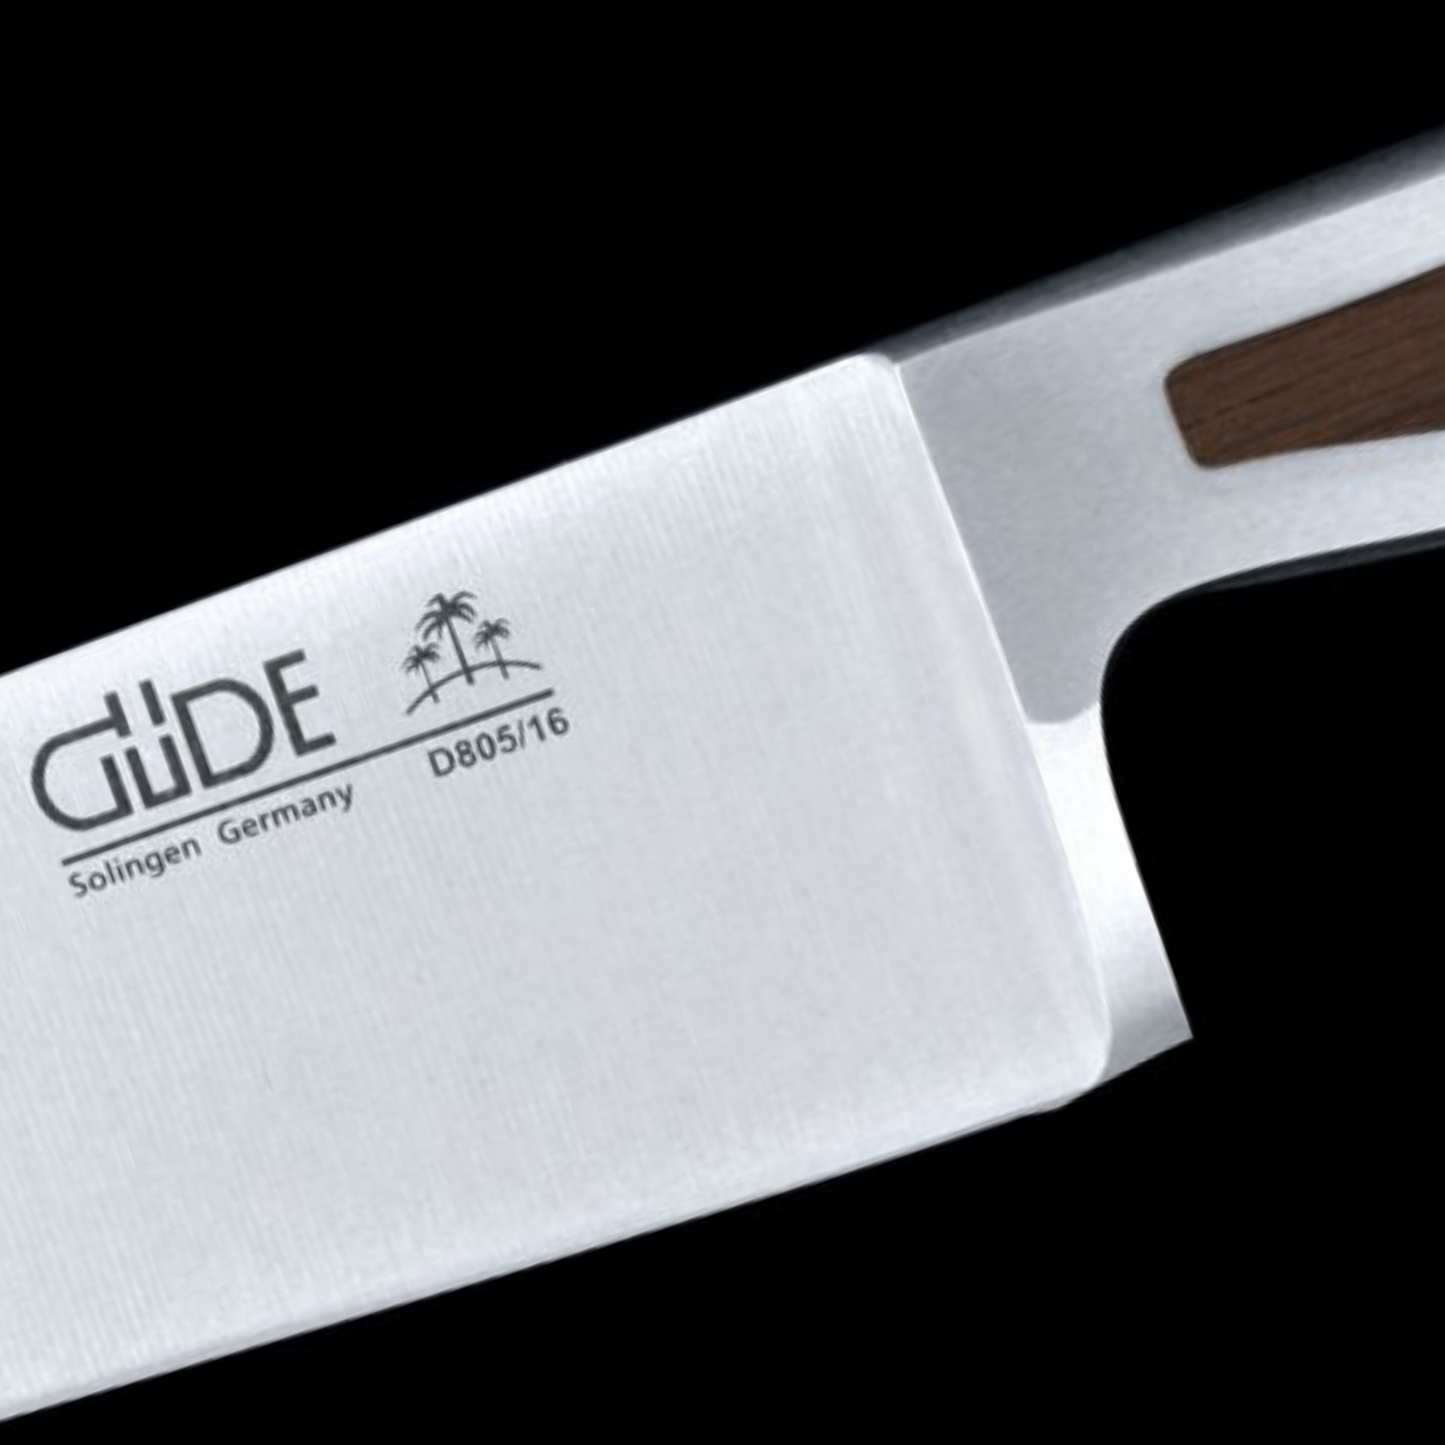 Gude Delta Series Forged Double Bolster Chef's Knife 6", African Black Wood Handle - GuedeUSA